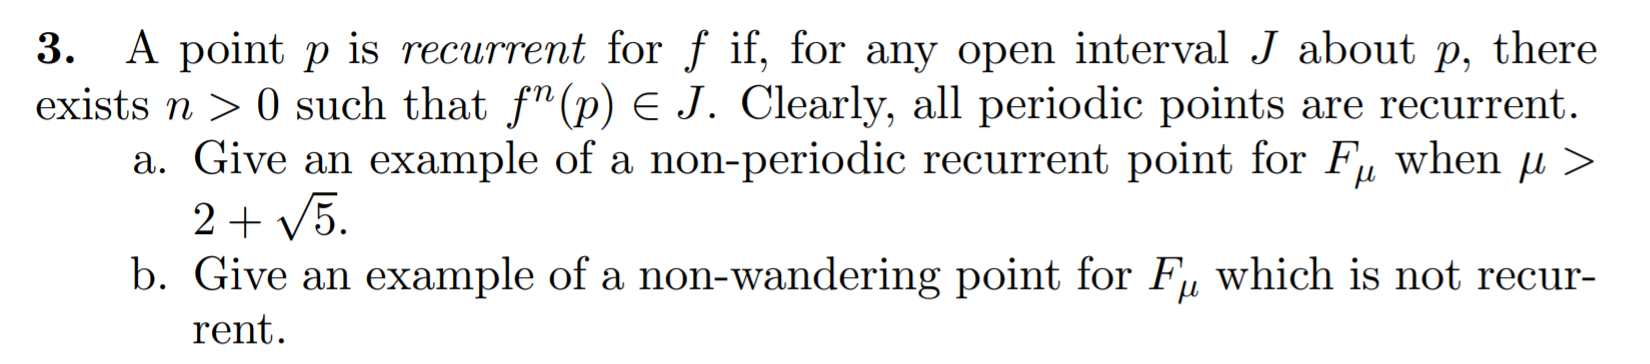 A point p is recurrent for f if, for any open interval J about p, there
ists n > 0 such that f"(p) E J. Clearly, all periodic points are recurrent.
a. Give an example of a non-periodic recurrent point for F, when µ >
2+ V5.
b. Give an example of a non-wandering point for F, which is not recur-
rent.
